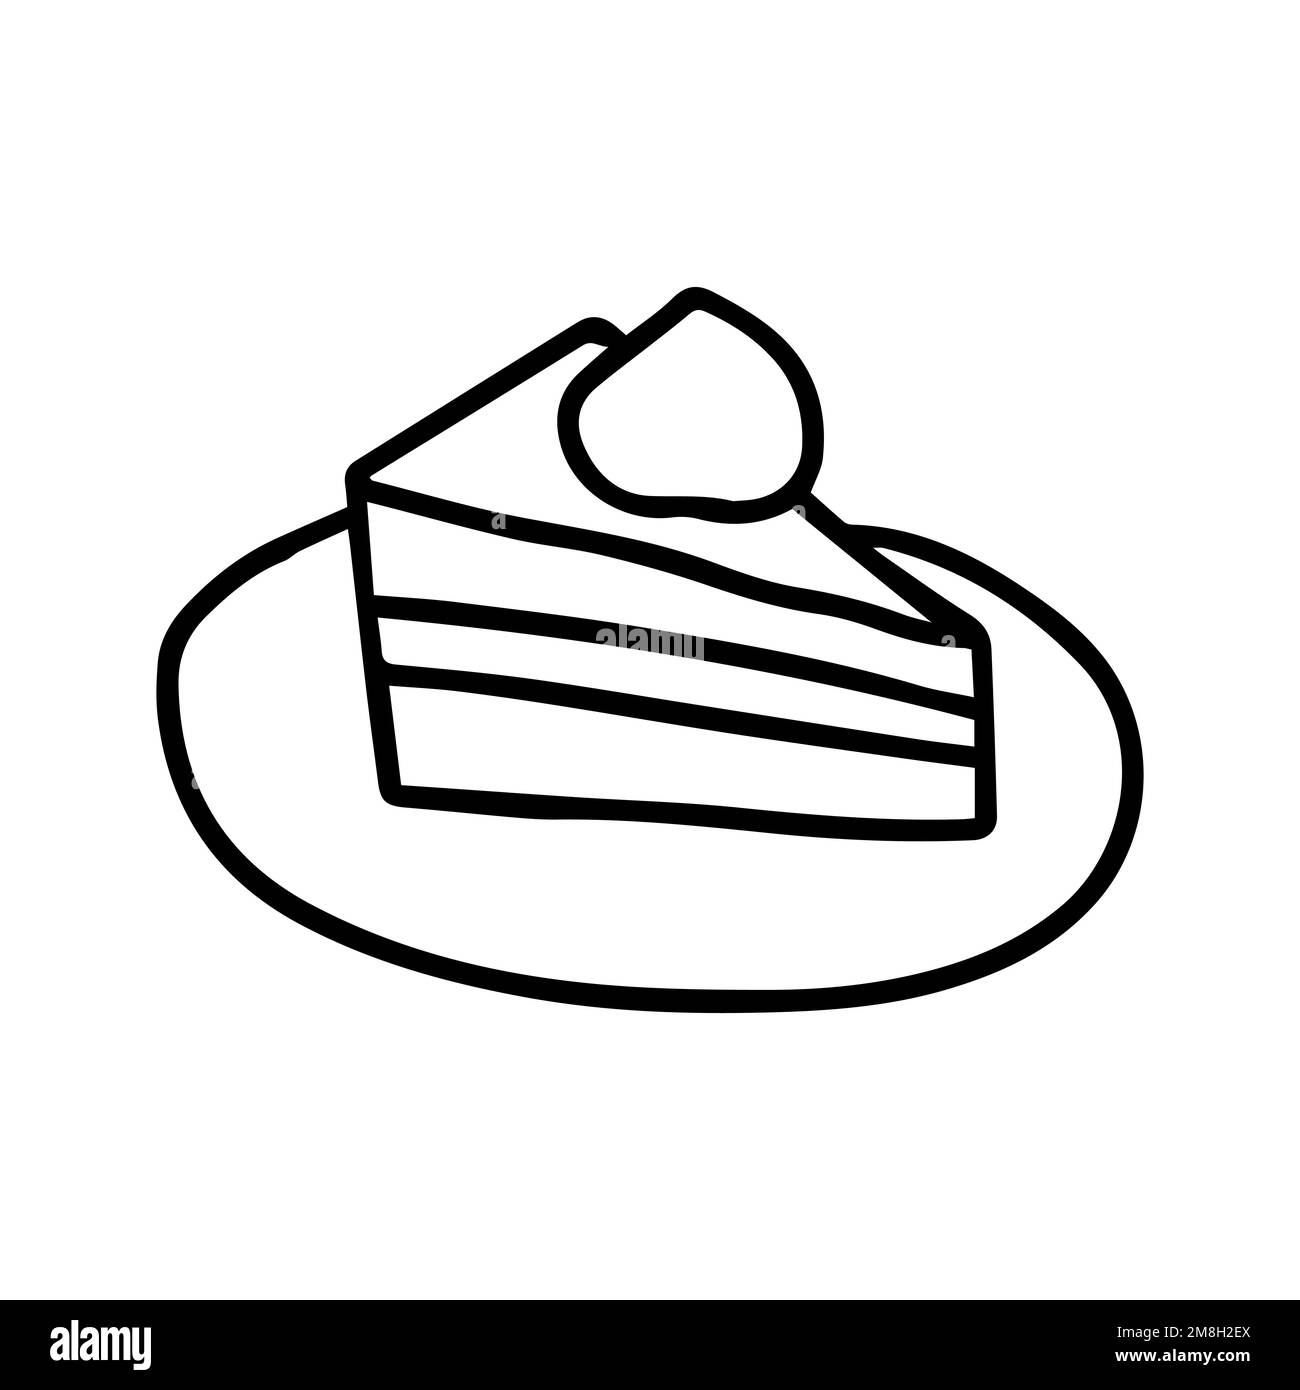 Slice of cake on plate Stock Vector